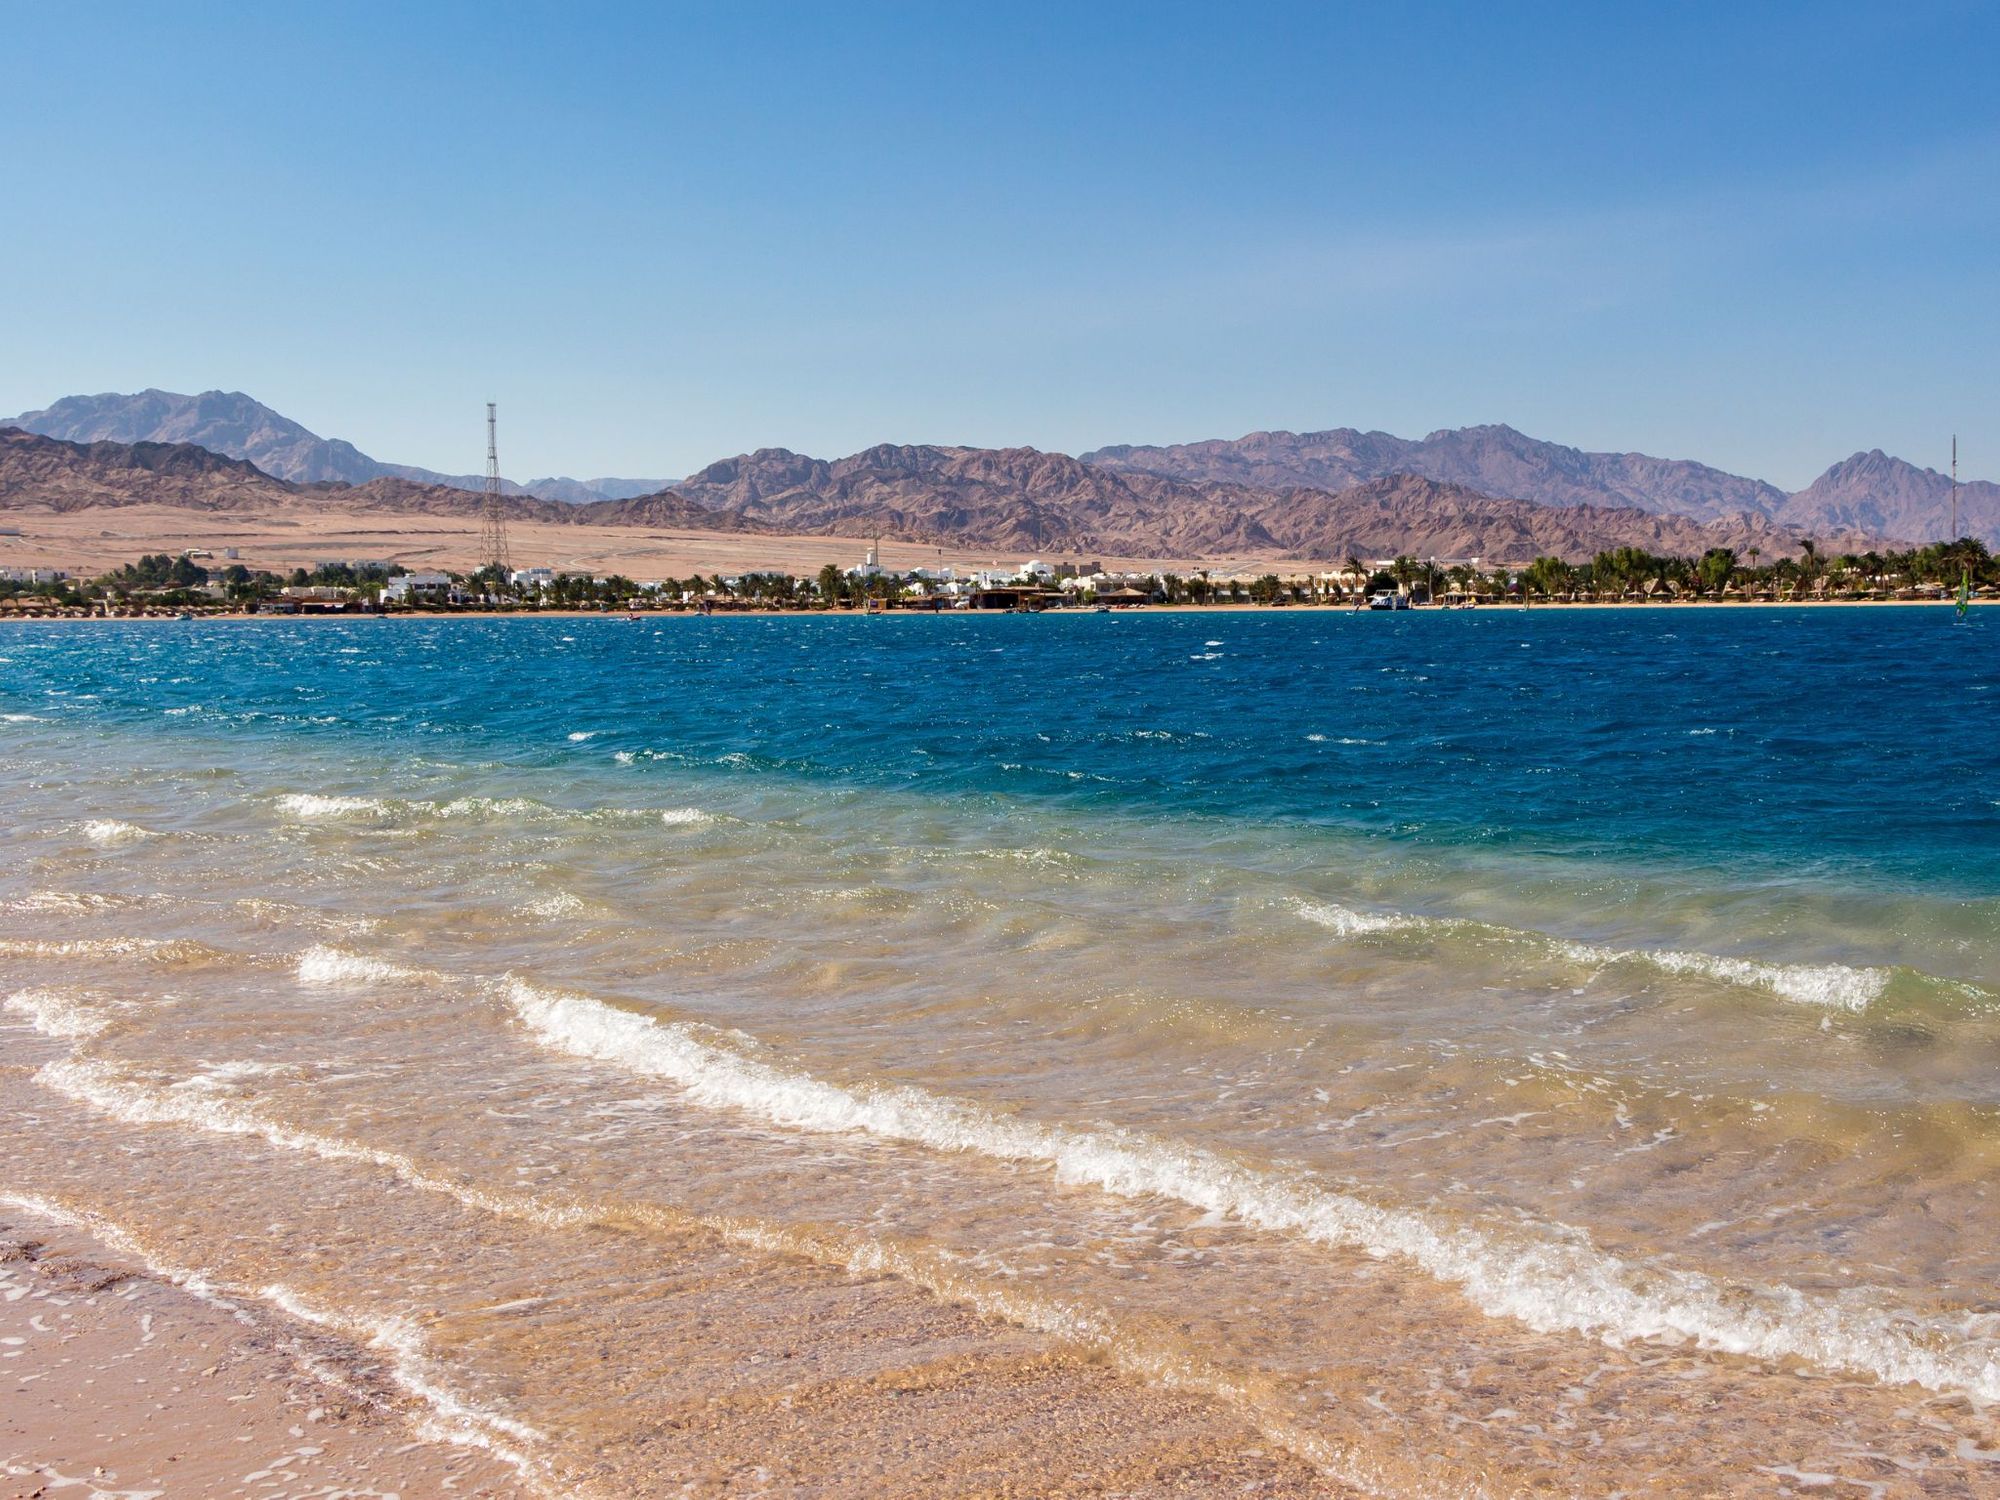 Dahab, Egypt, sea in the foreground and desert in the background.